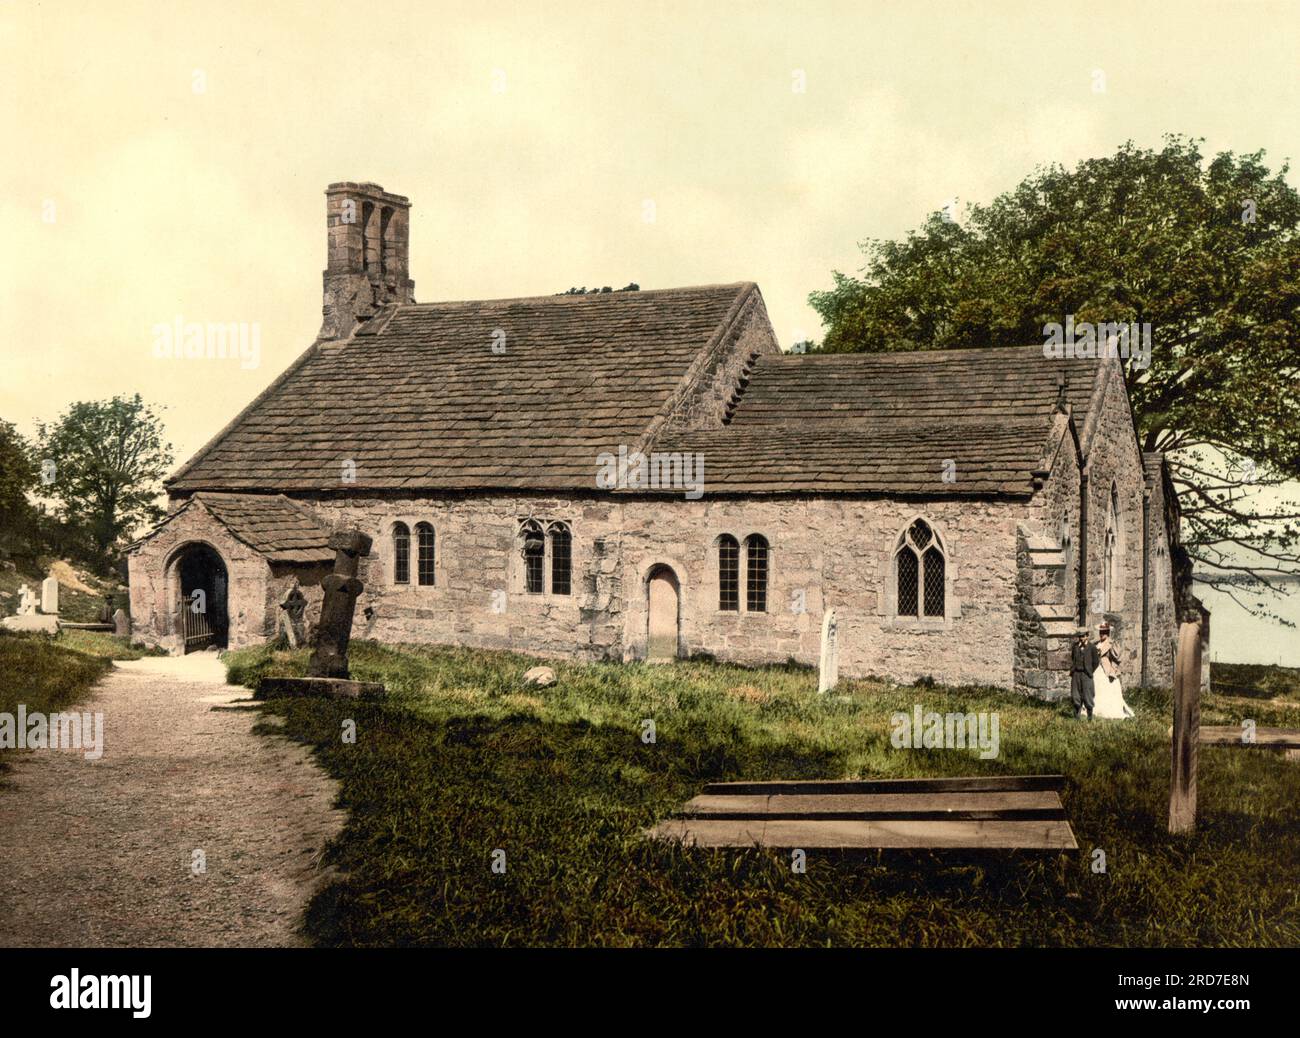 Heysham Church, Morecambe, a seaside town and civil parish in the City of Lancaster, England, 1895, Historical, digital improved reproduction of an old Photochrome print Stock Photo